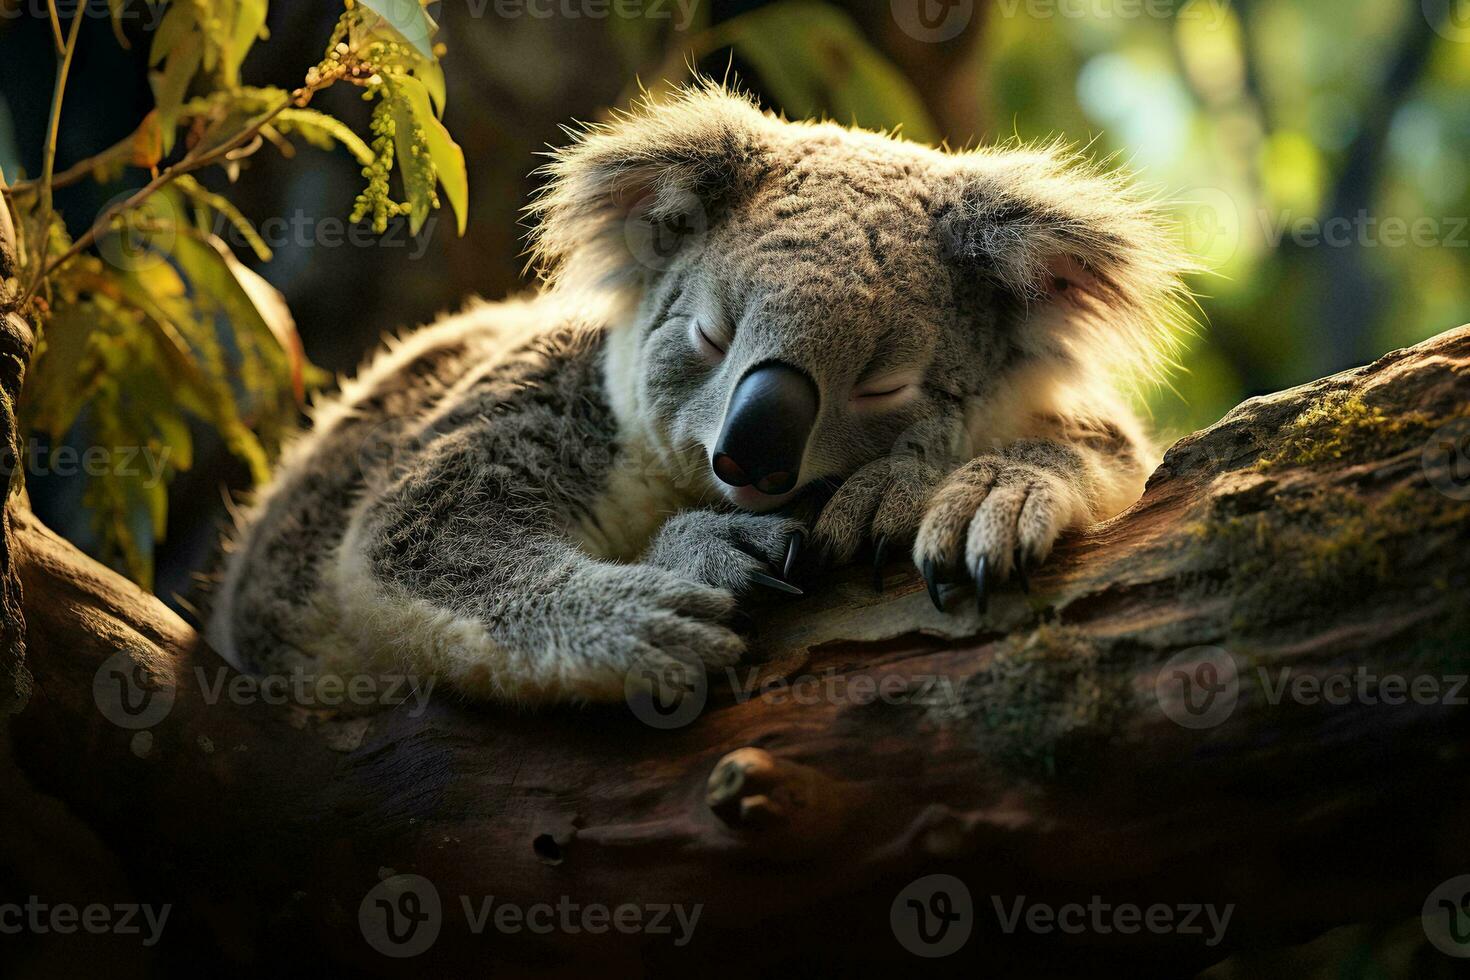 AI generated a sleeping koala nestled on a tree branch, surrounded by lush greenery. The lighting is soft and diffused, illuminating the koala gently and highlighting photo